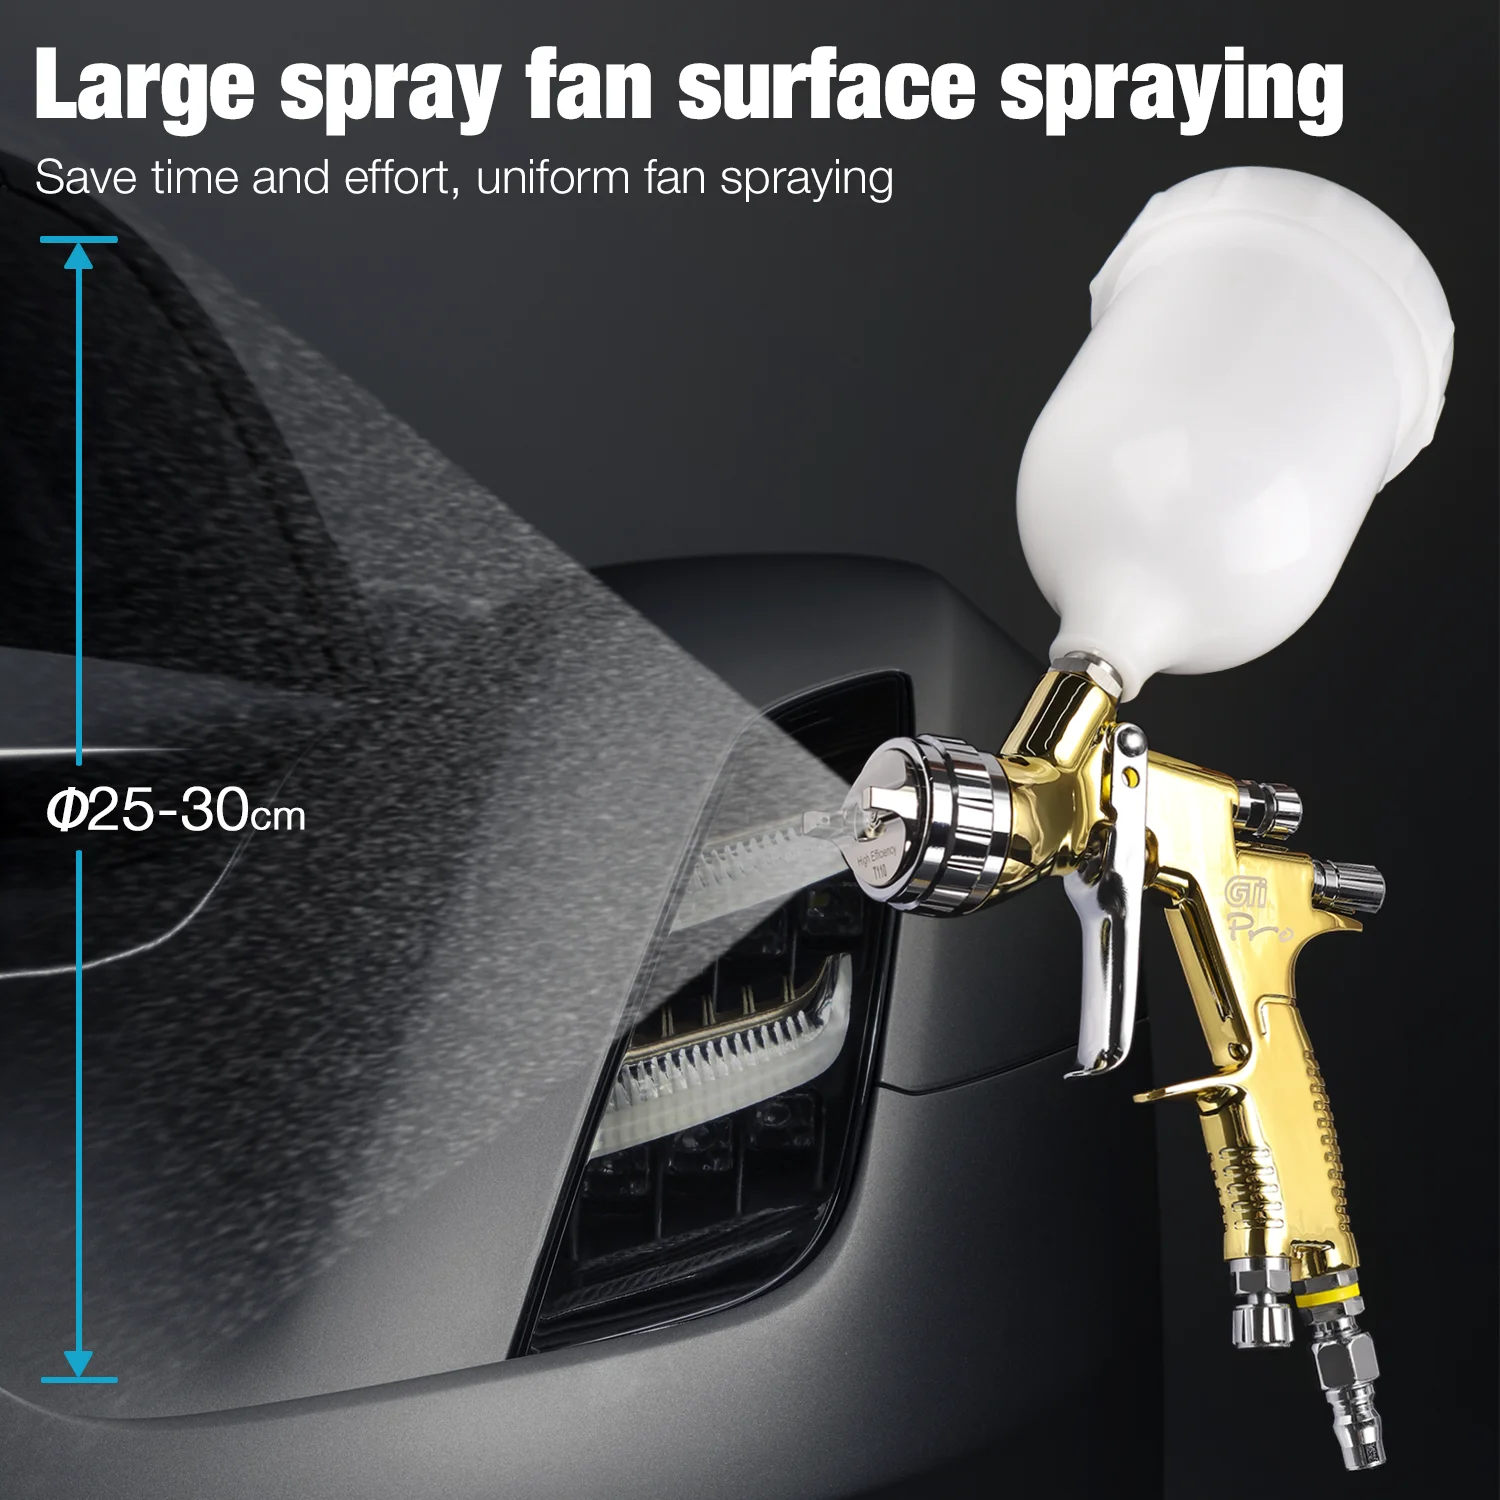 New High Quality Spray  GTI Pro 1.m Nozzle Painting  High Atomization Paint  Wat - £148.55 GBP